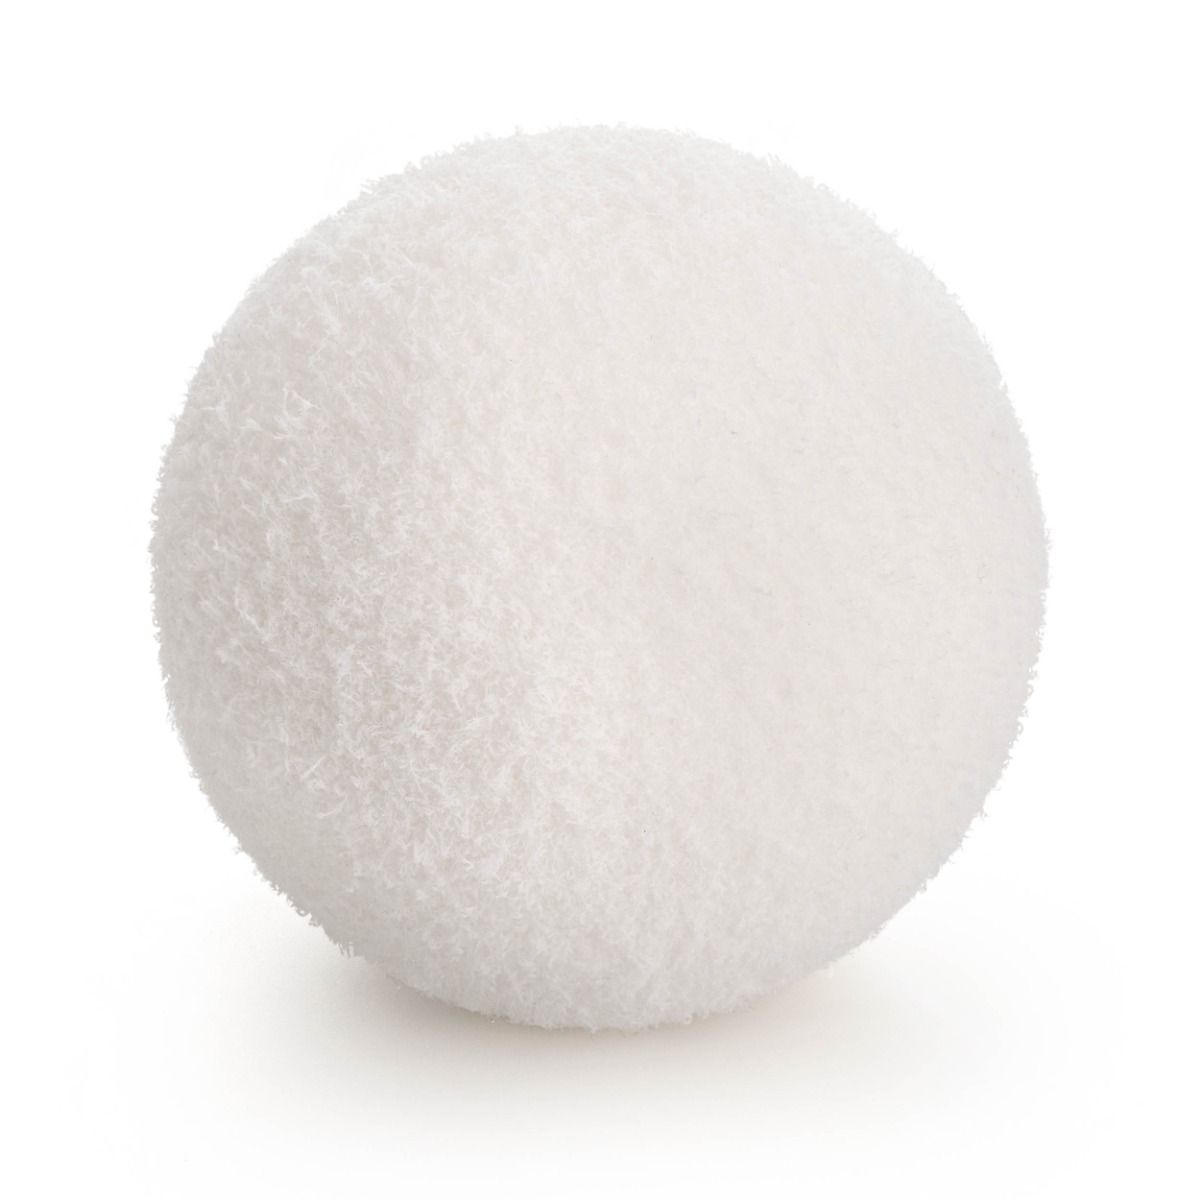 Absorbaball